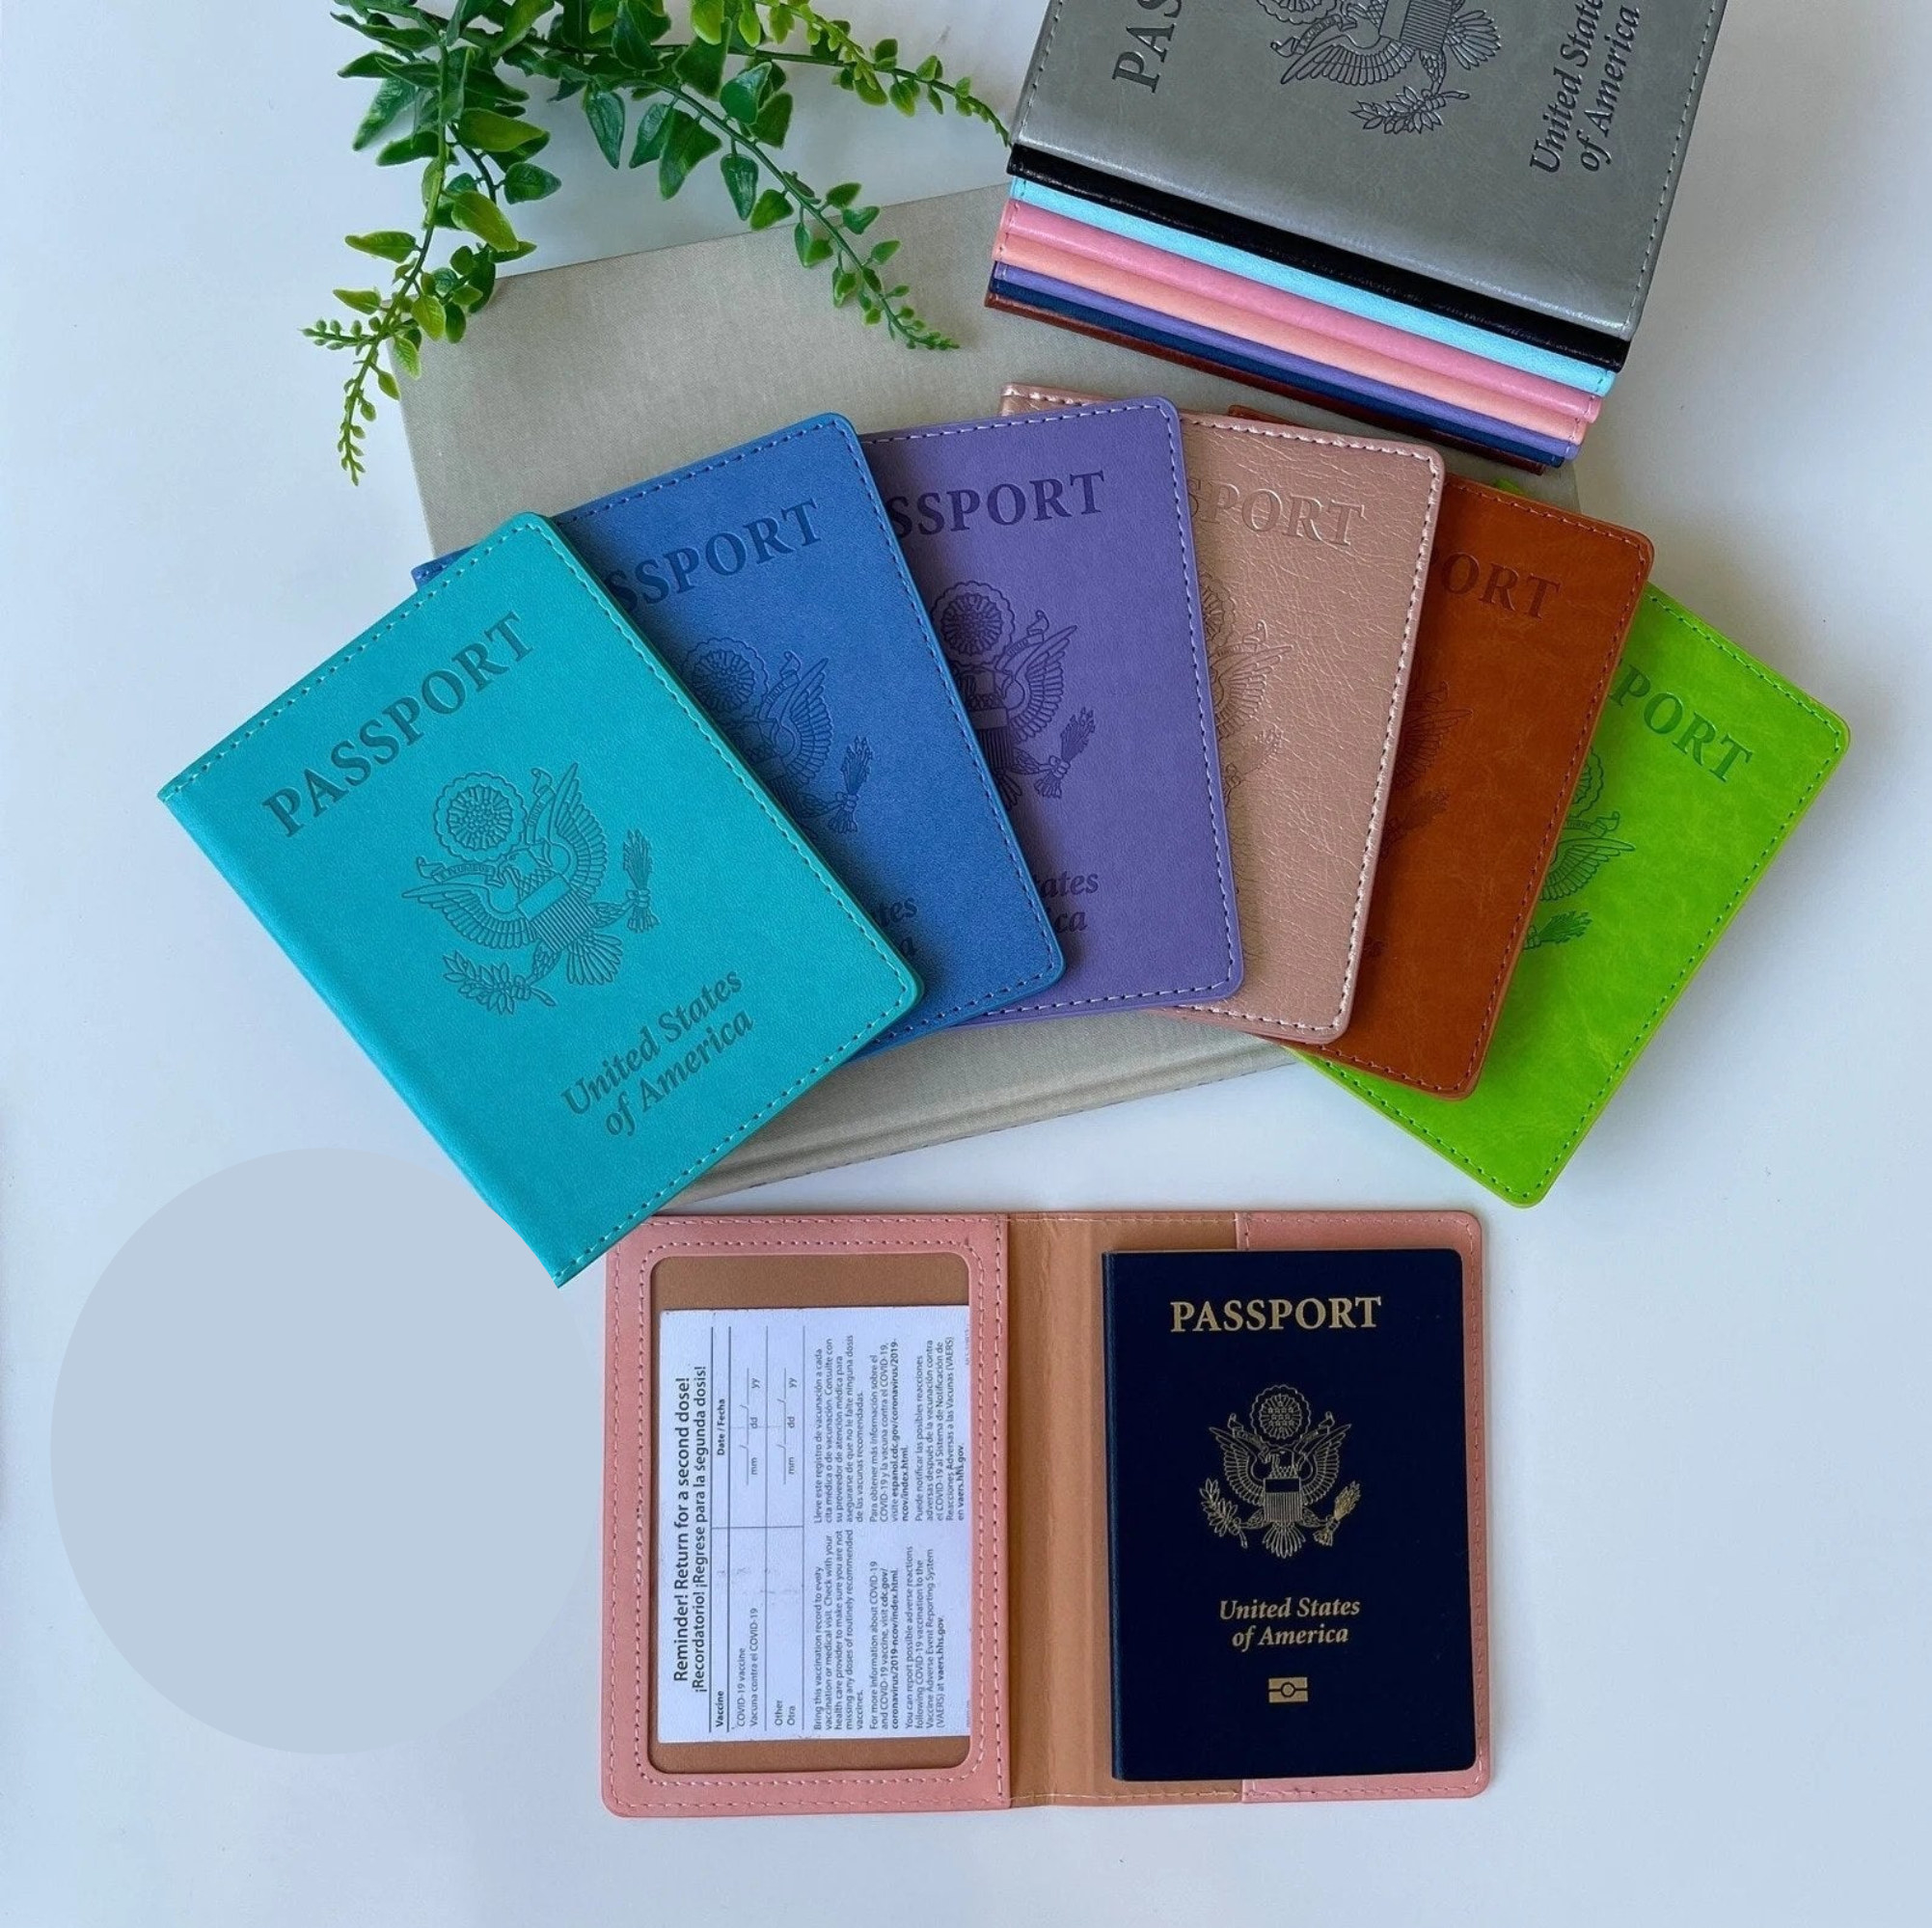 a stack of colorful passports holder, some fanned out, and one passport holder opened to show its contents